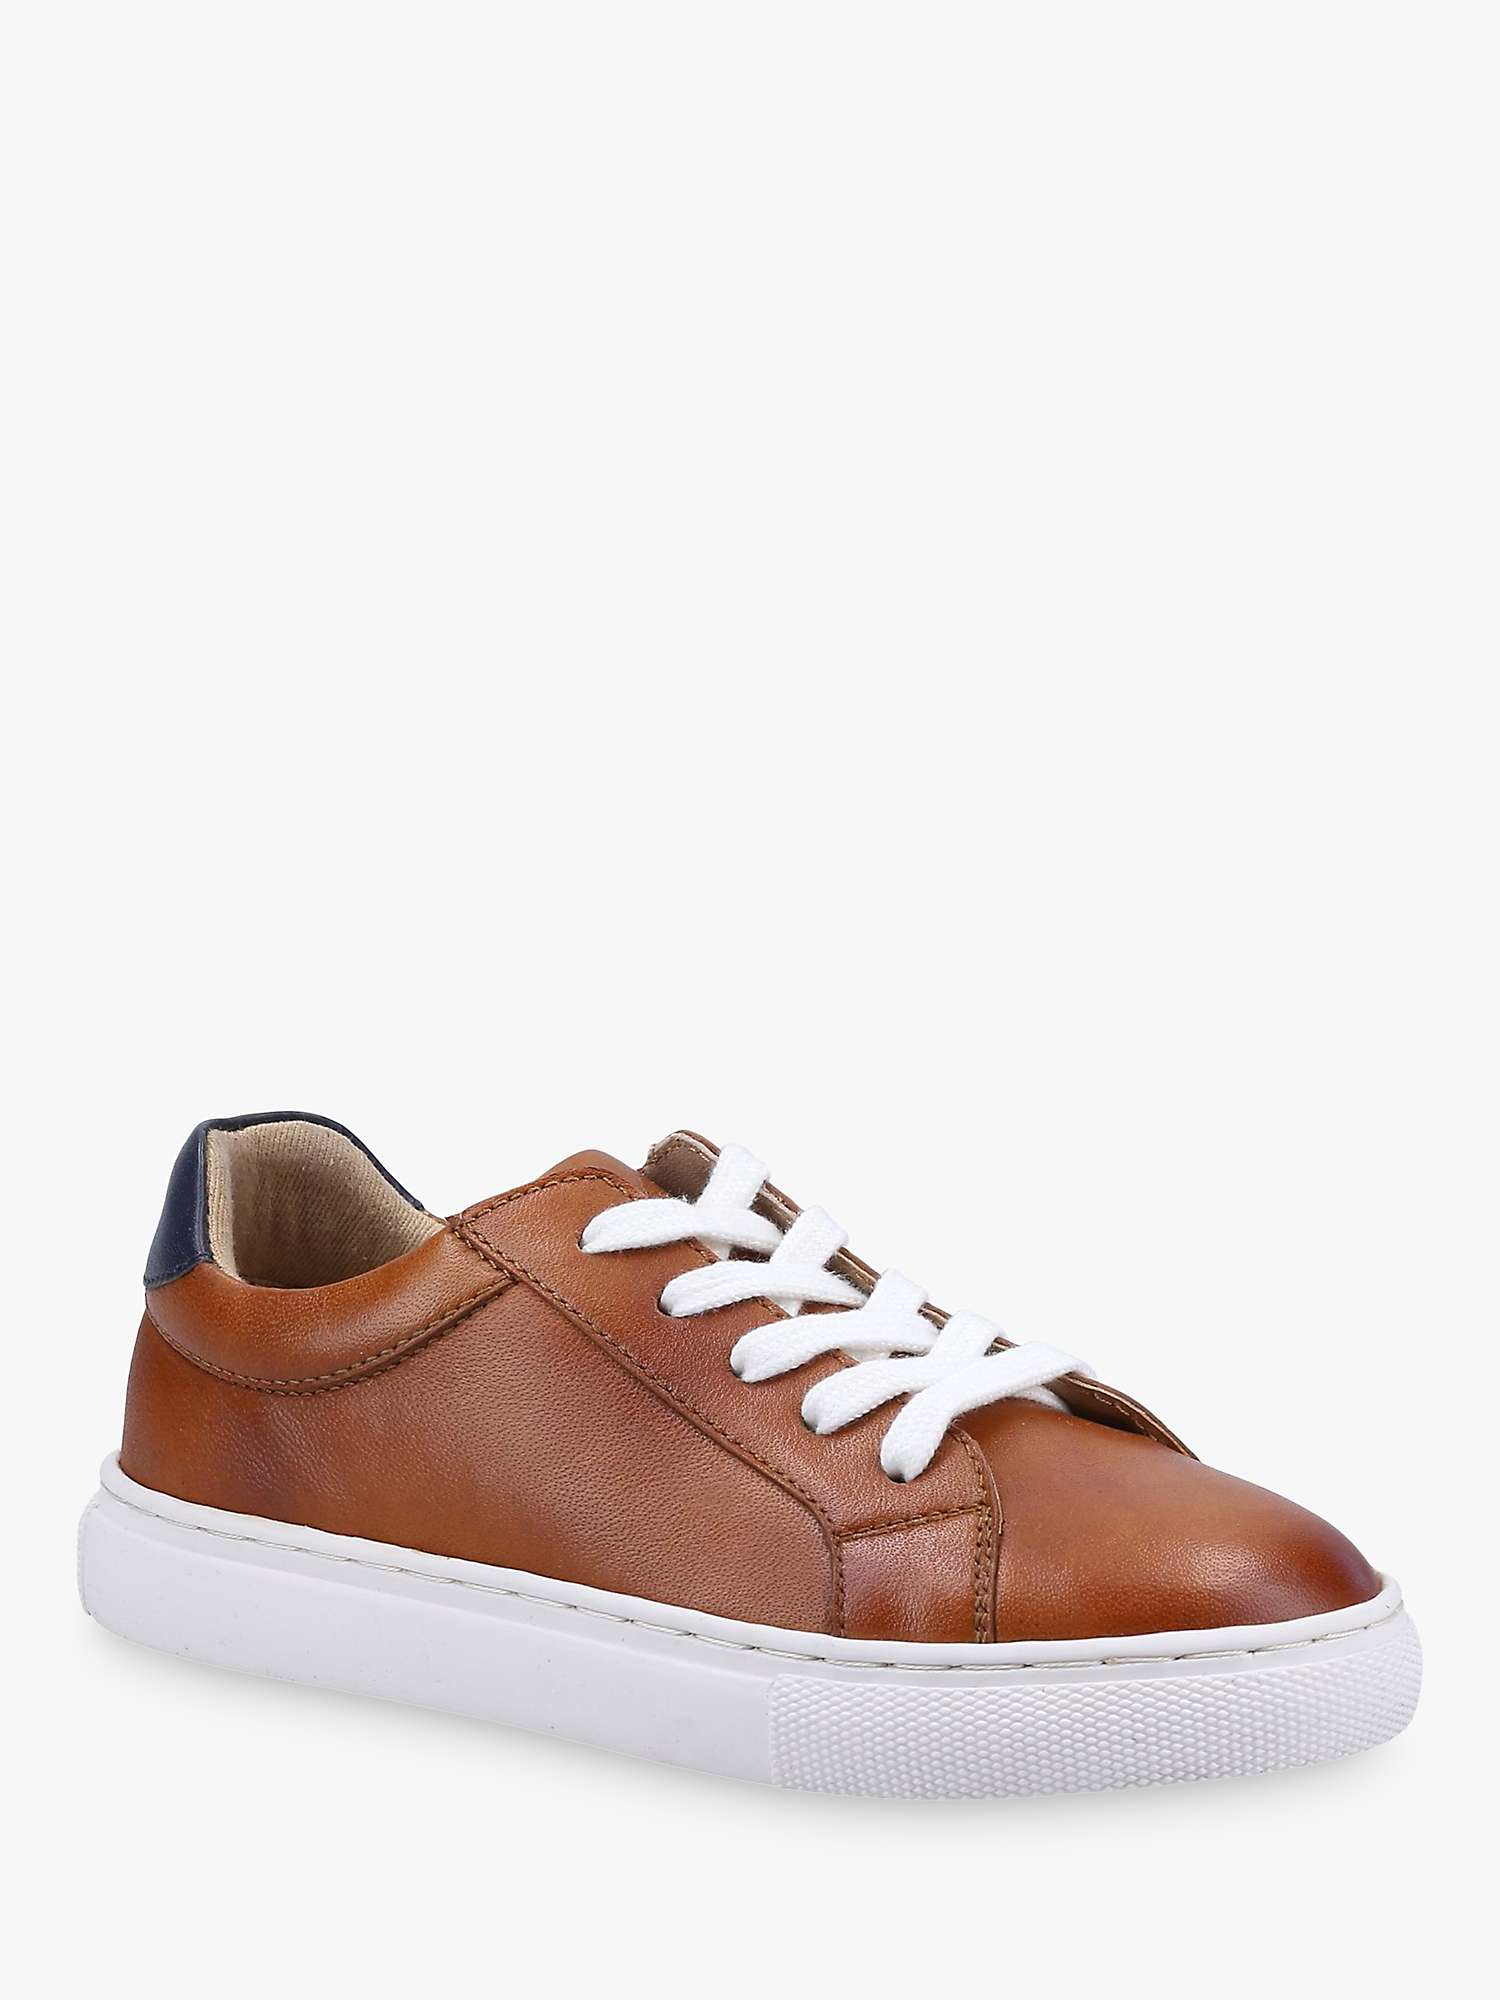 Buy Hush Puppies Kids' Mini Colton Leather Trainers Online at johnlewis.com